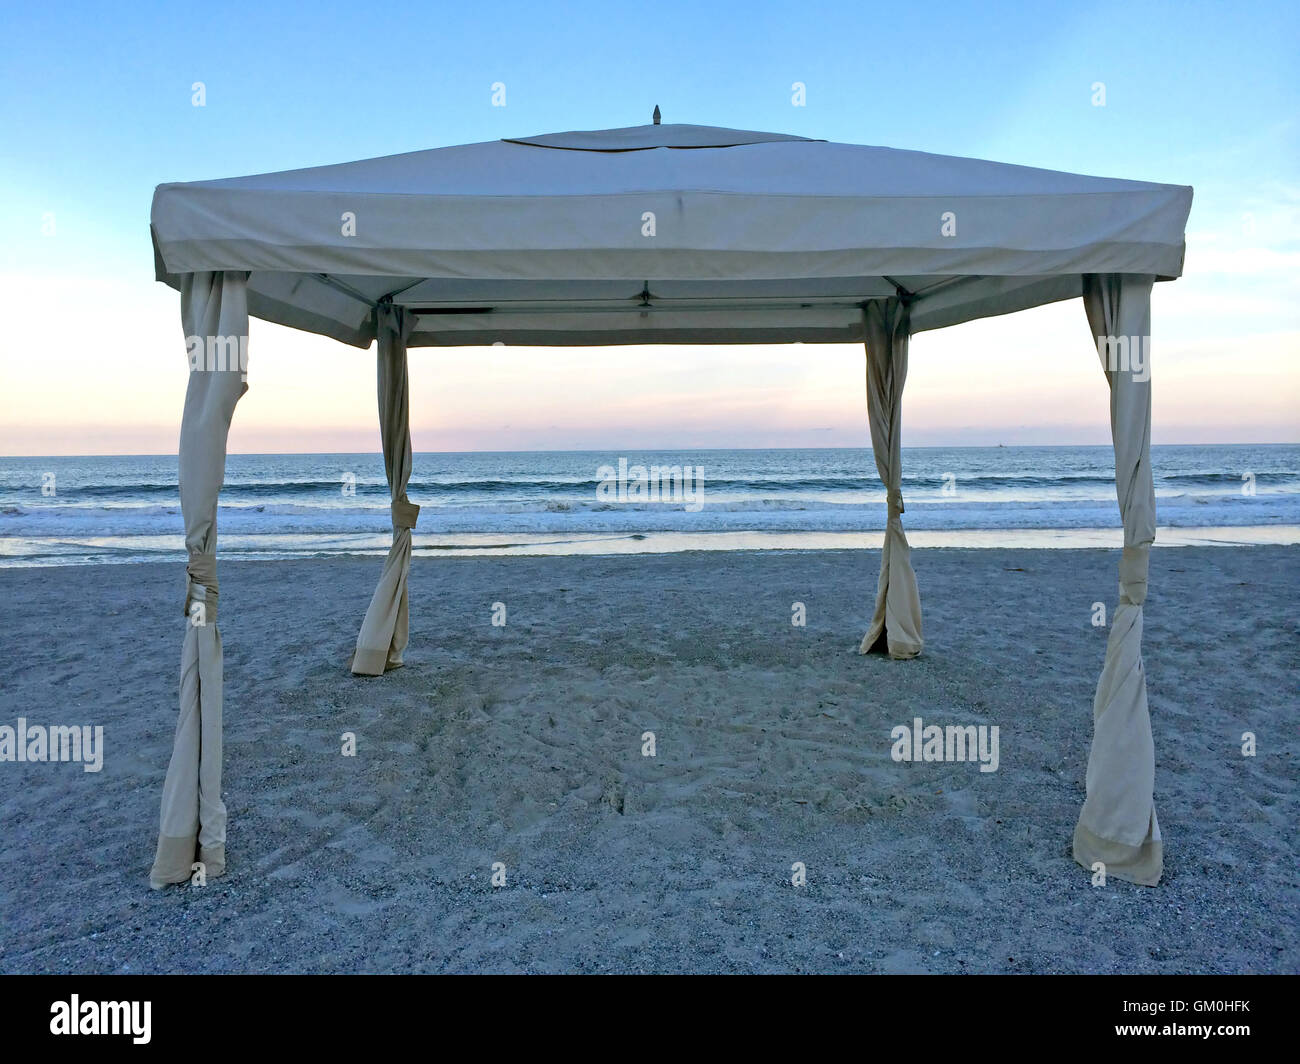 A cabana with it's sides tide back on the beach at sunset Stock Photo